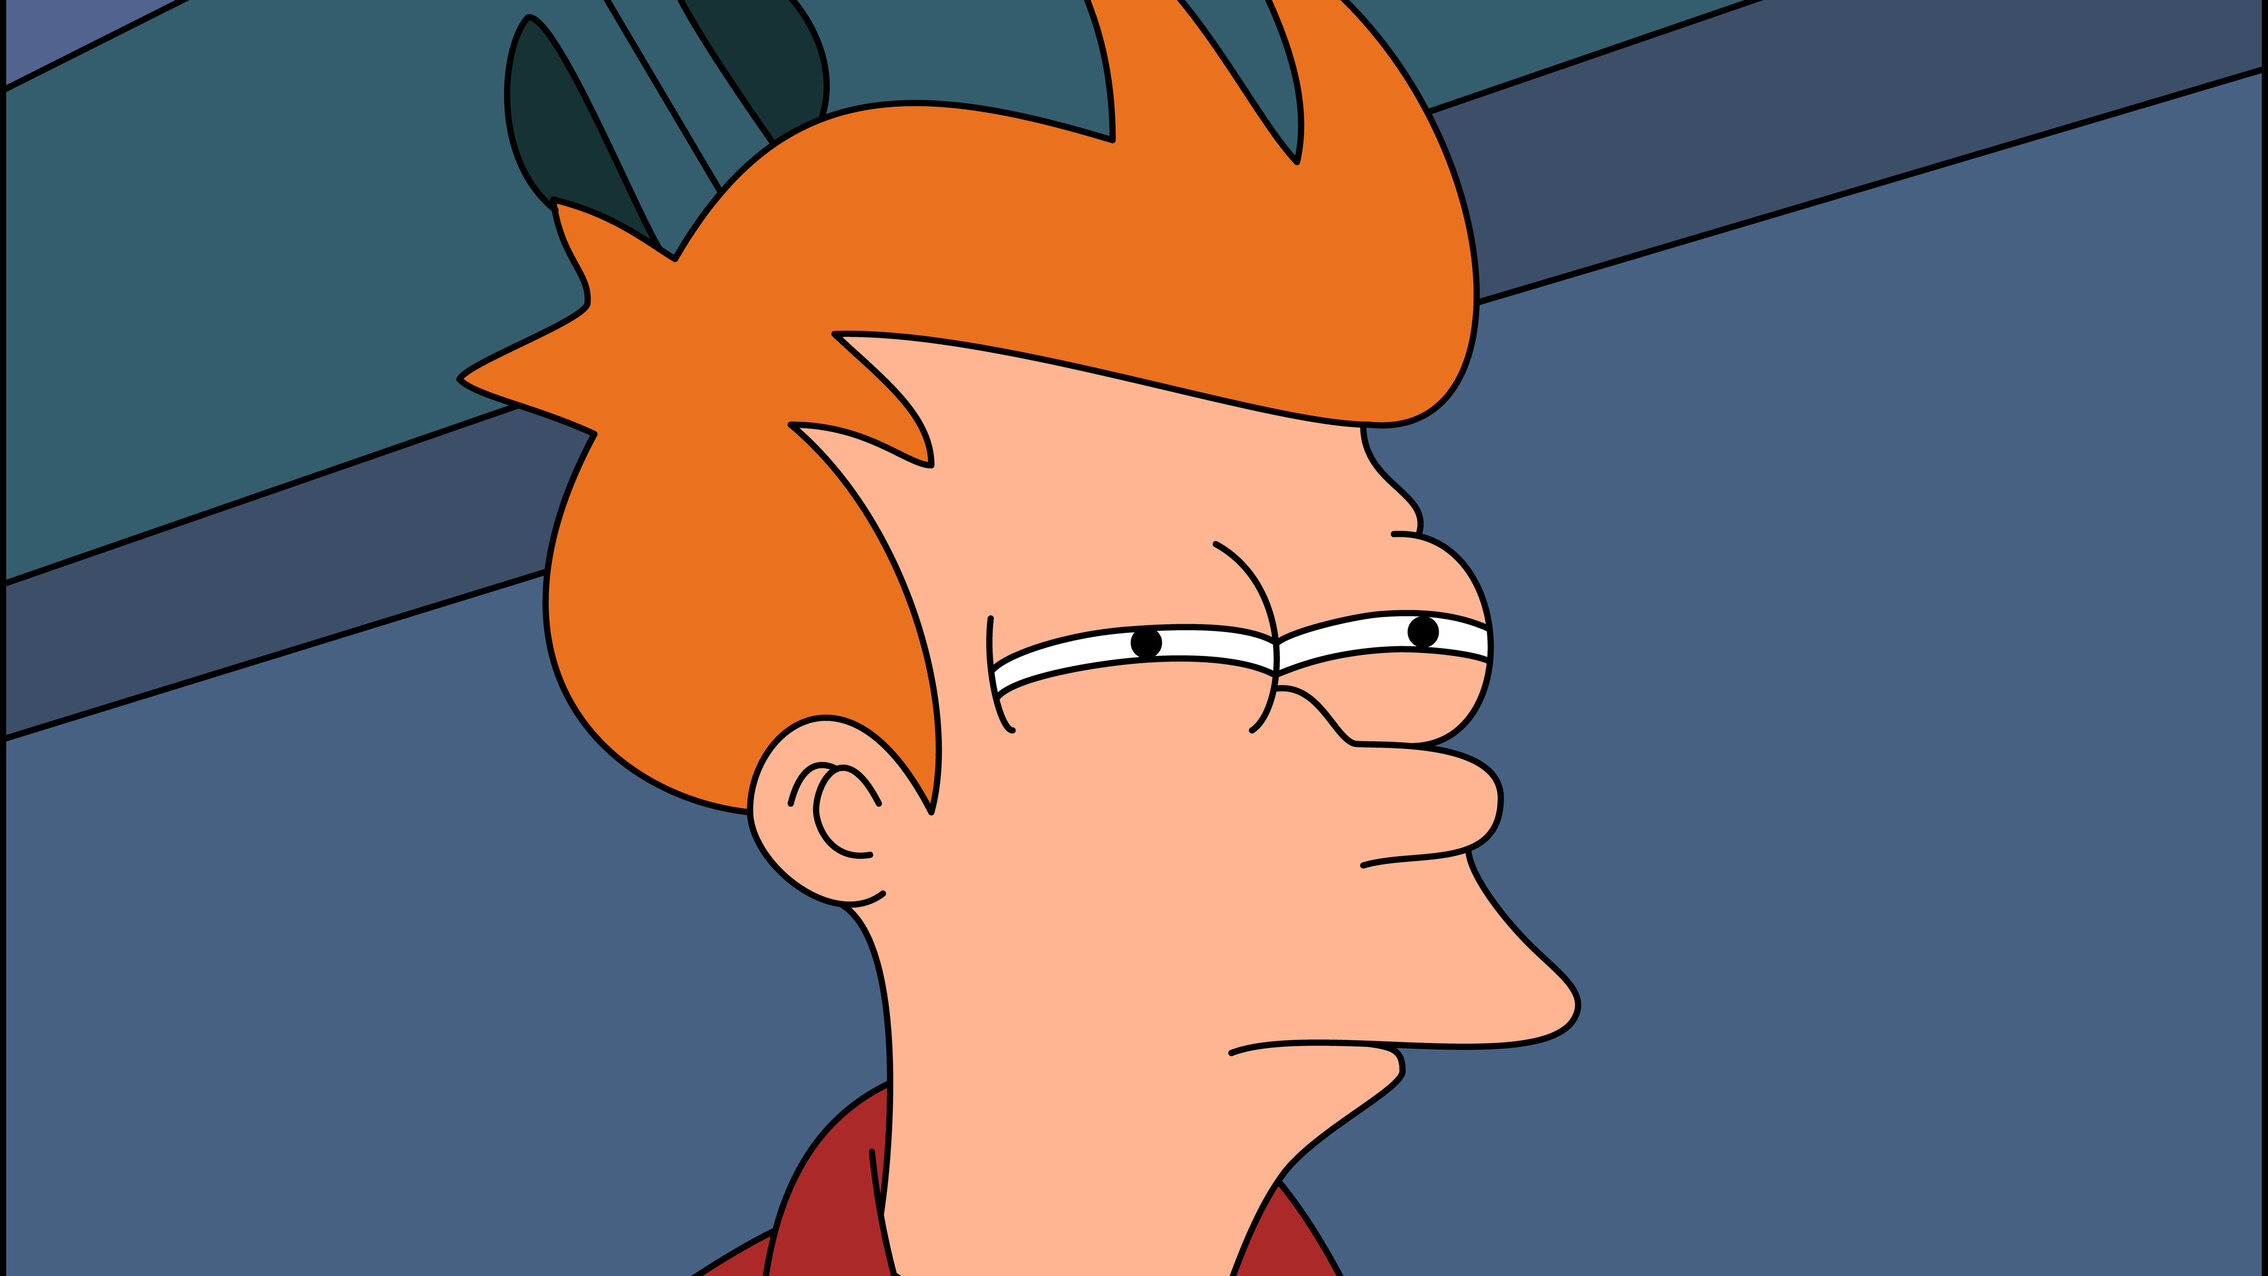 Image of Fry from the animated show Futurama with narrowed eyes and a skeptical look